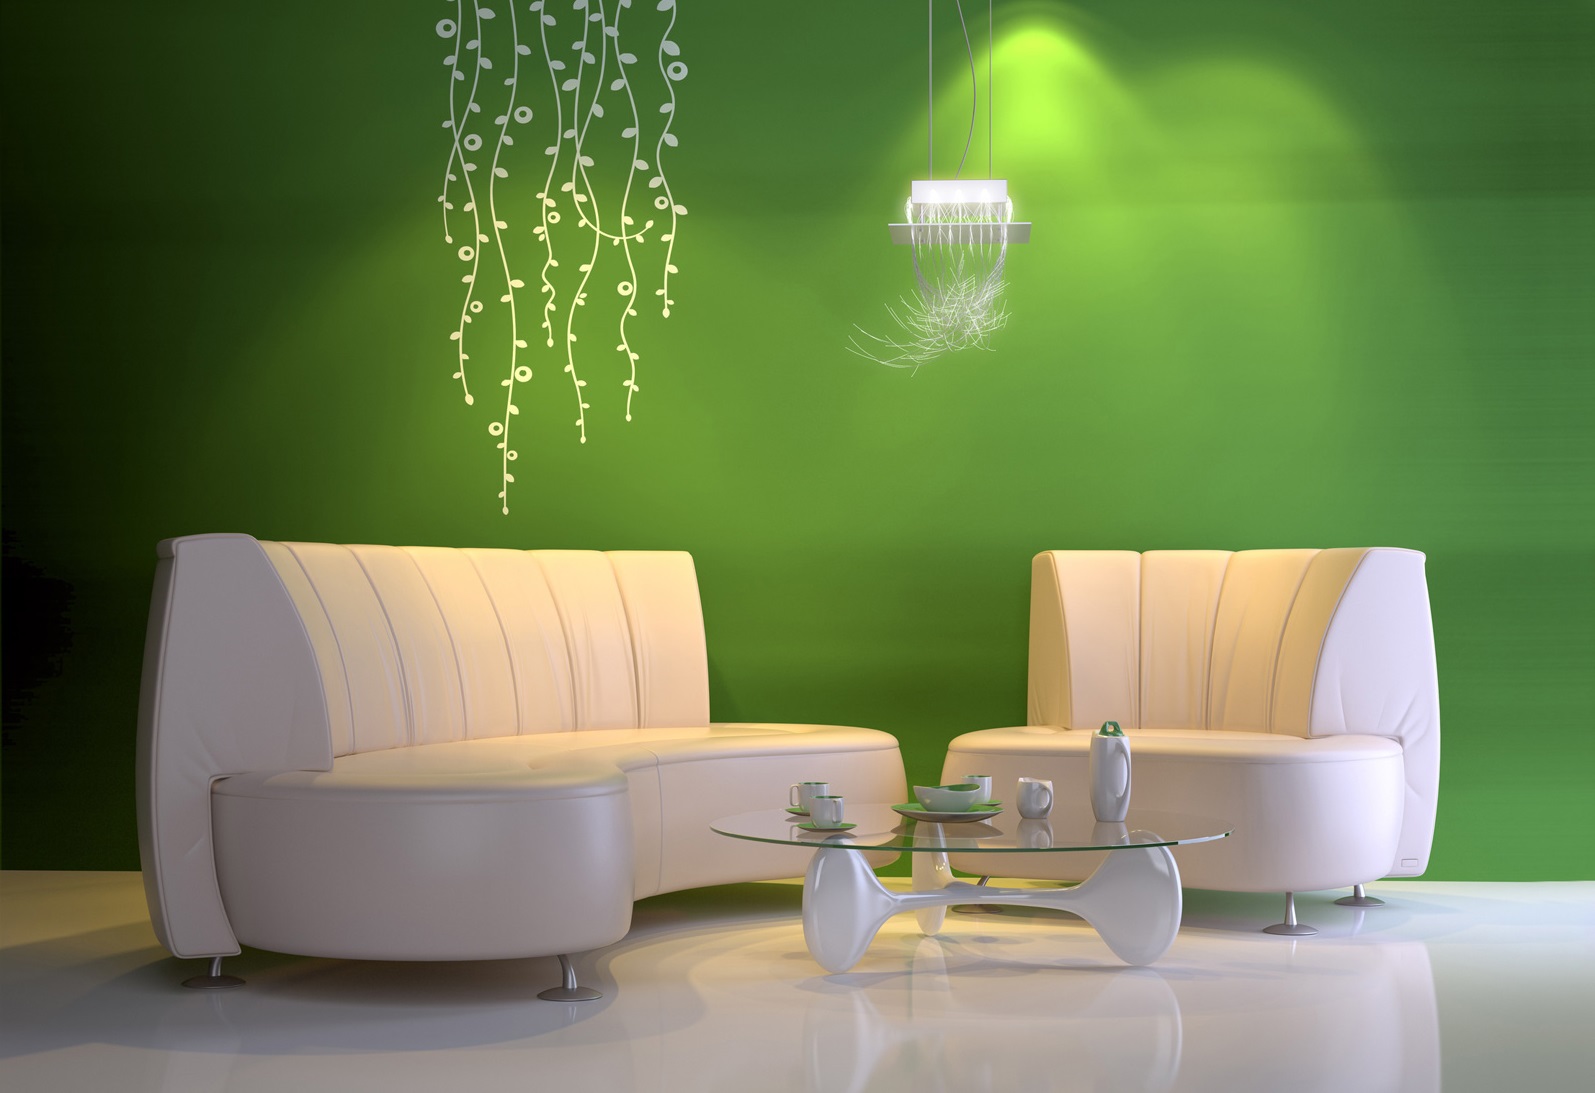 Green Living Ideas Enchanting Green Living Room Paint Ideas With White Wall Plants Decal Furnished With Pendant Lighting Plus Completed With White Sofa And Chairs In Armless Design Living Room Modern Living Room Paint Ideas With Color Combination